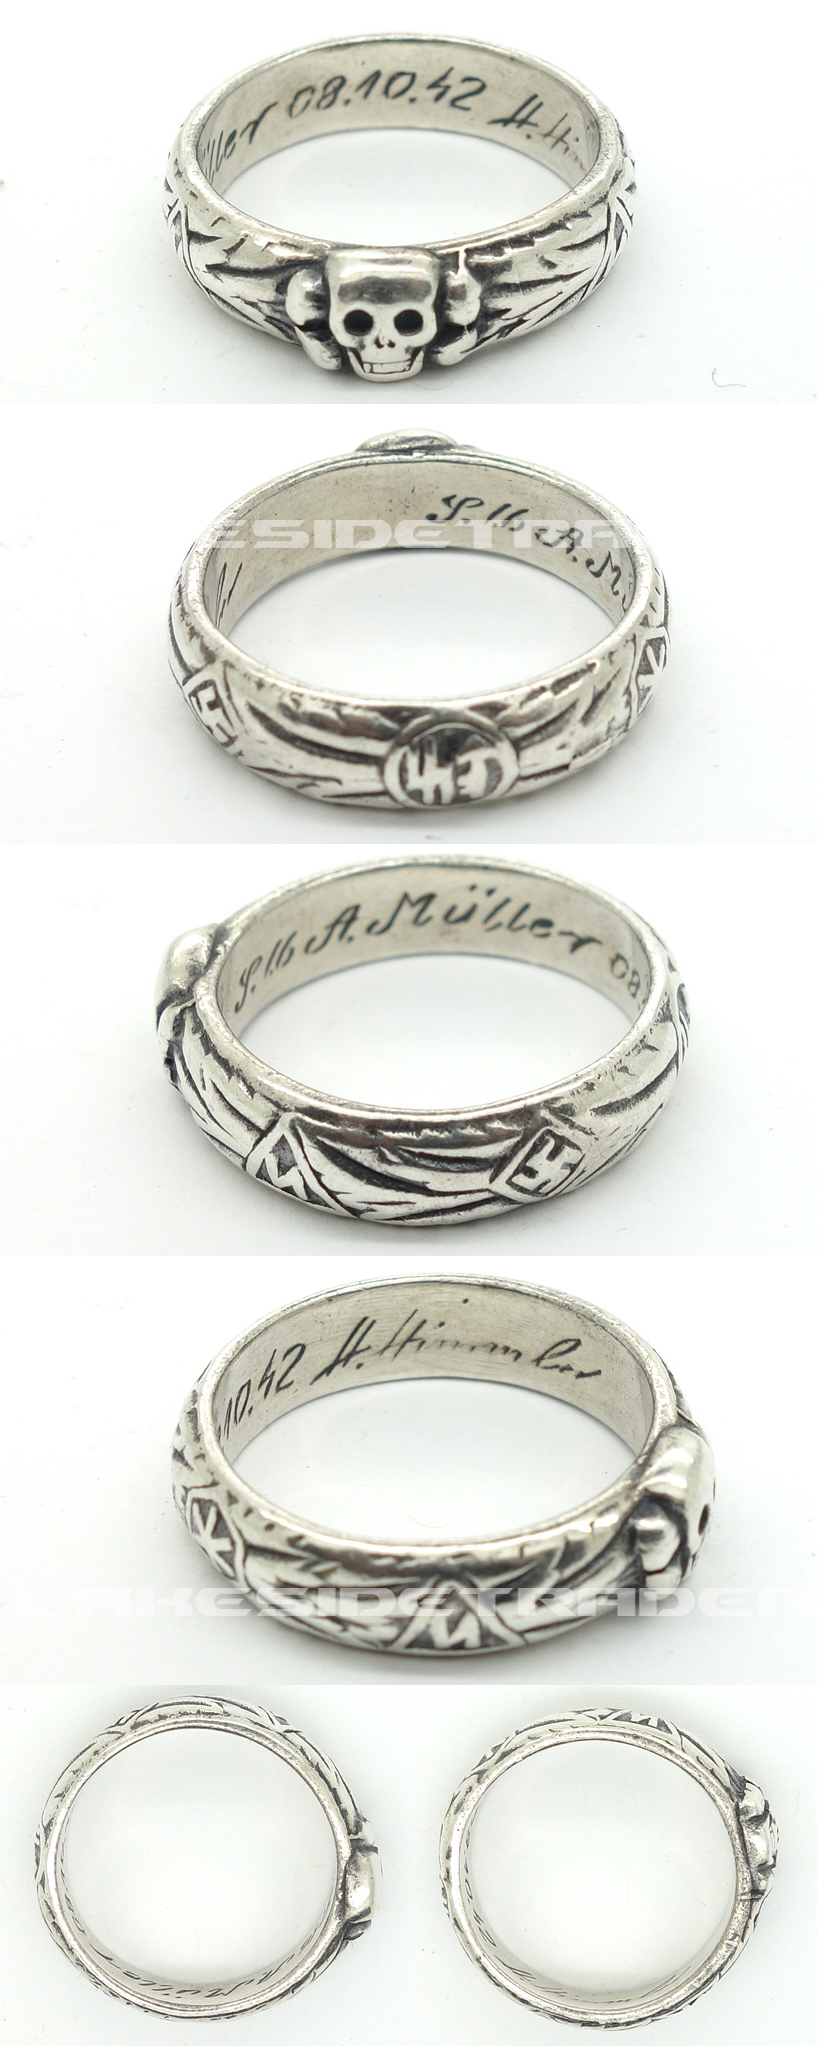 Reproduction - SS Honor Ring